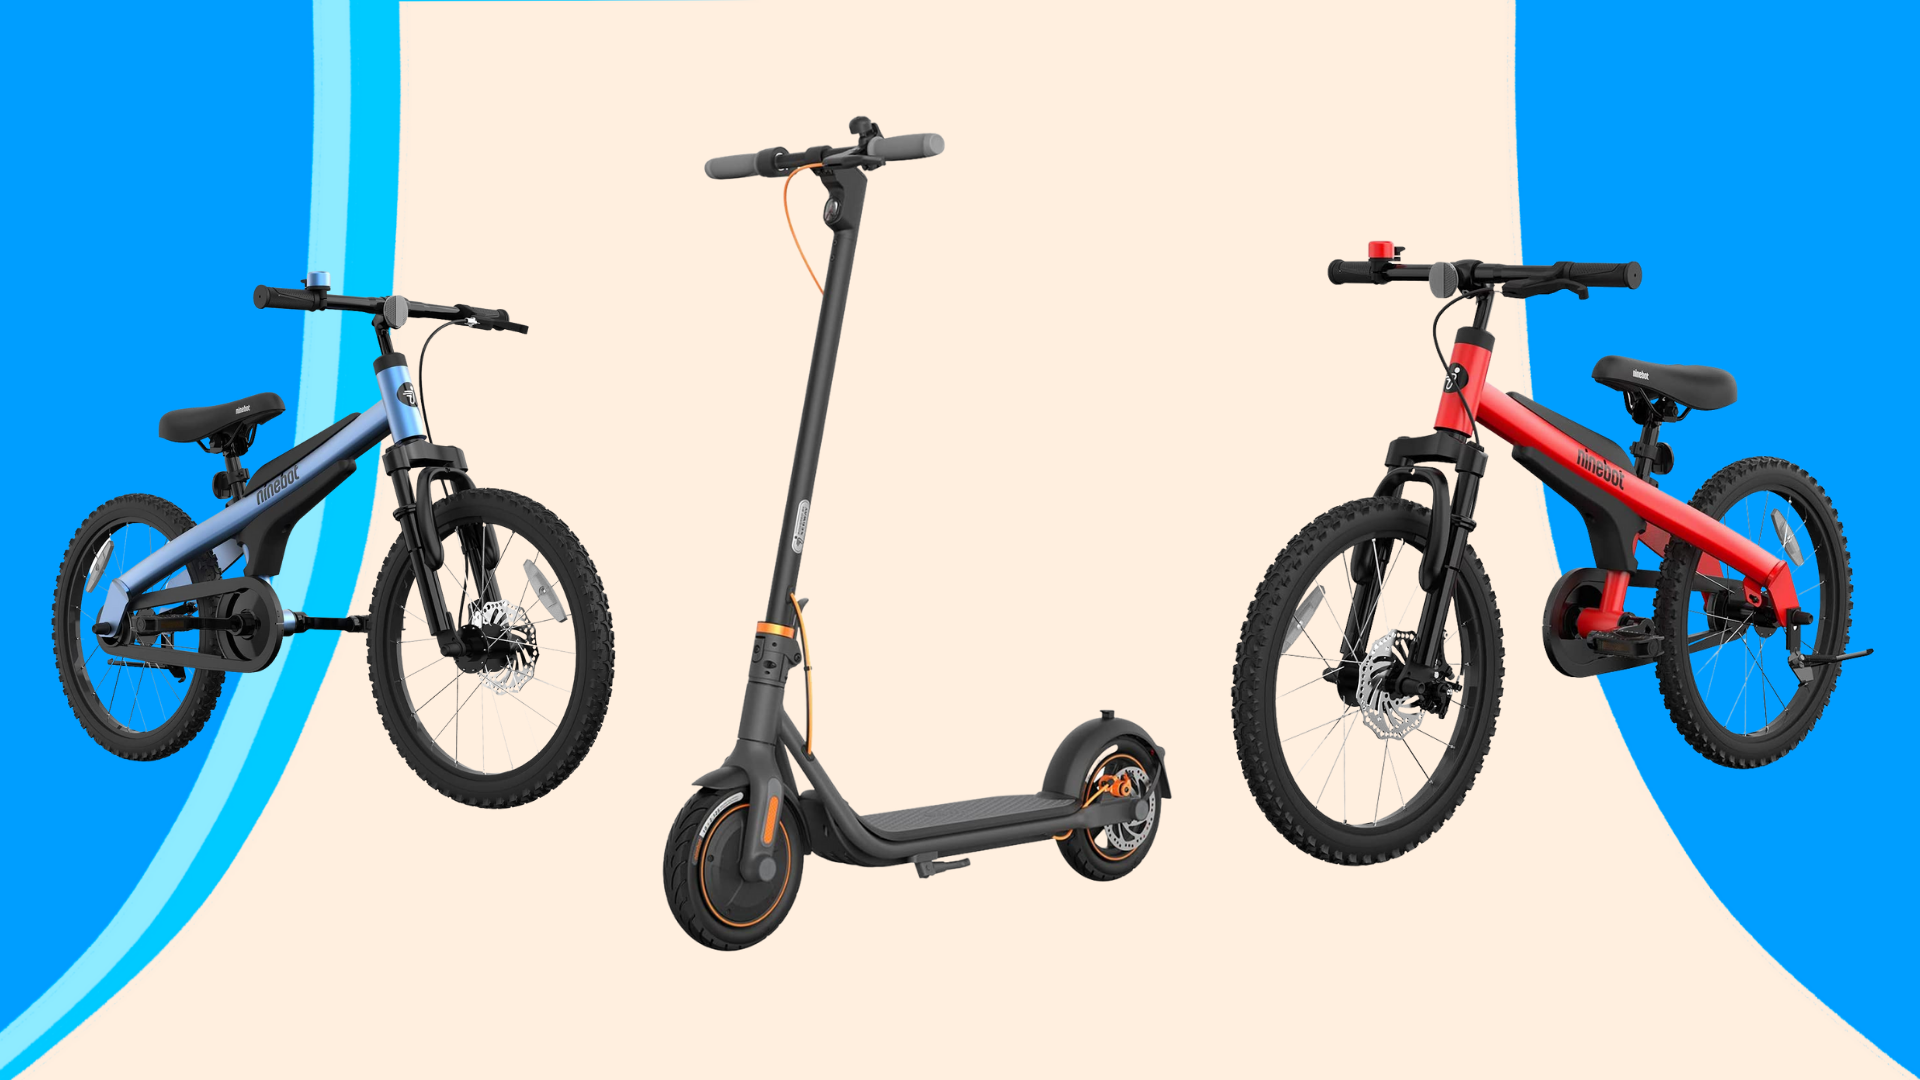 Segway electric scooters: Shop this Amazon sale for up to 20% off